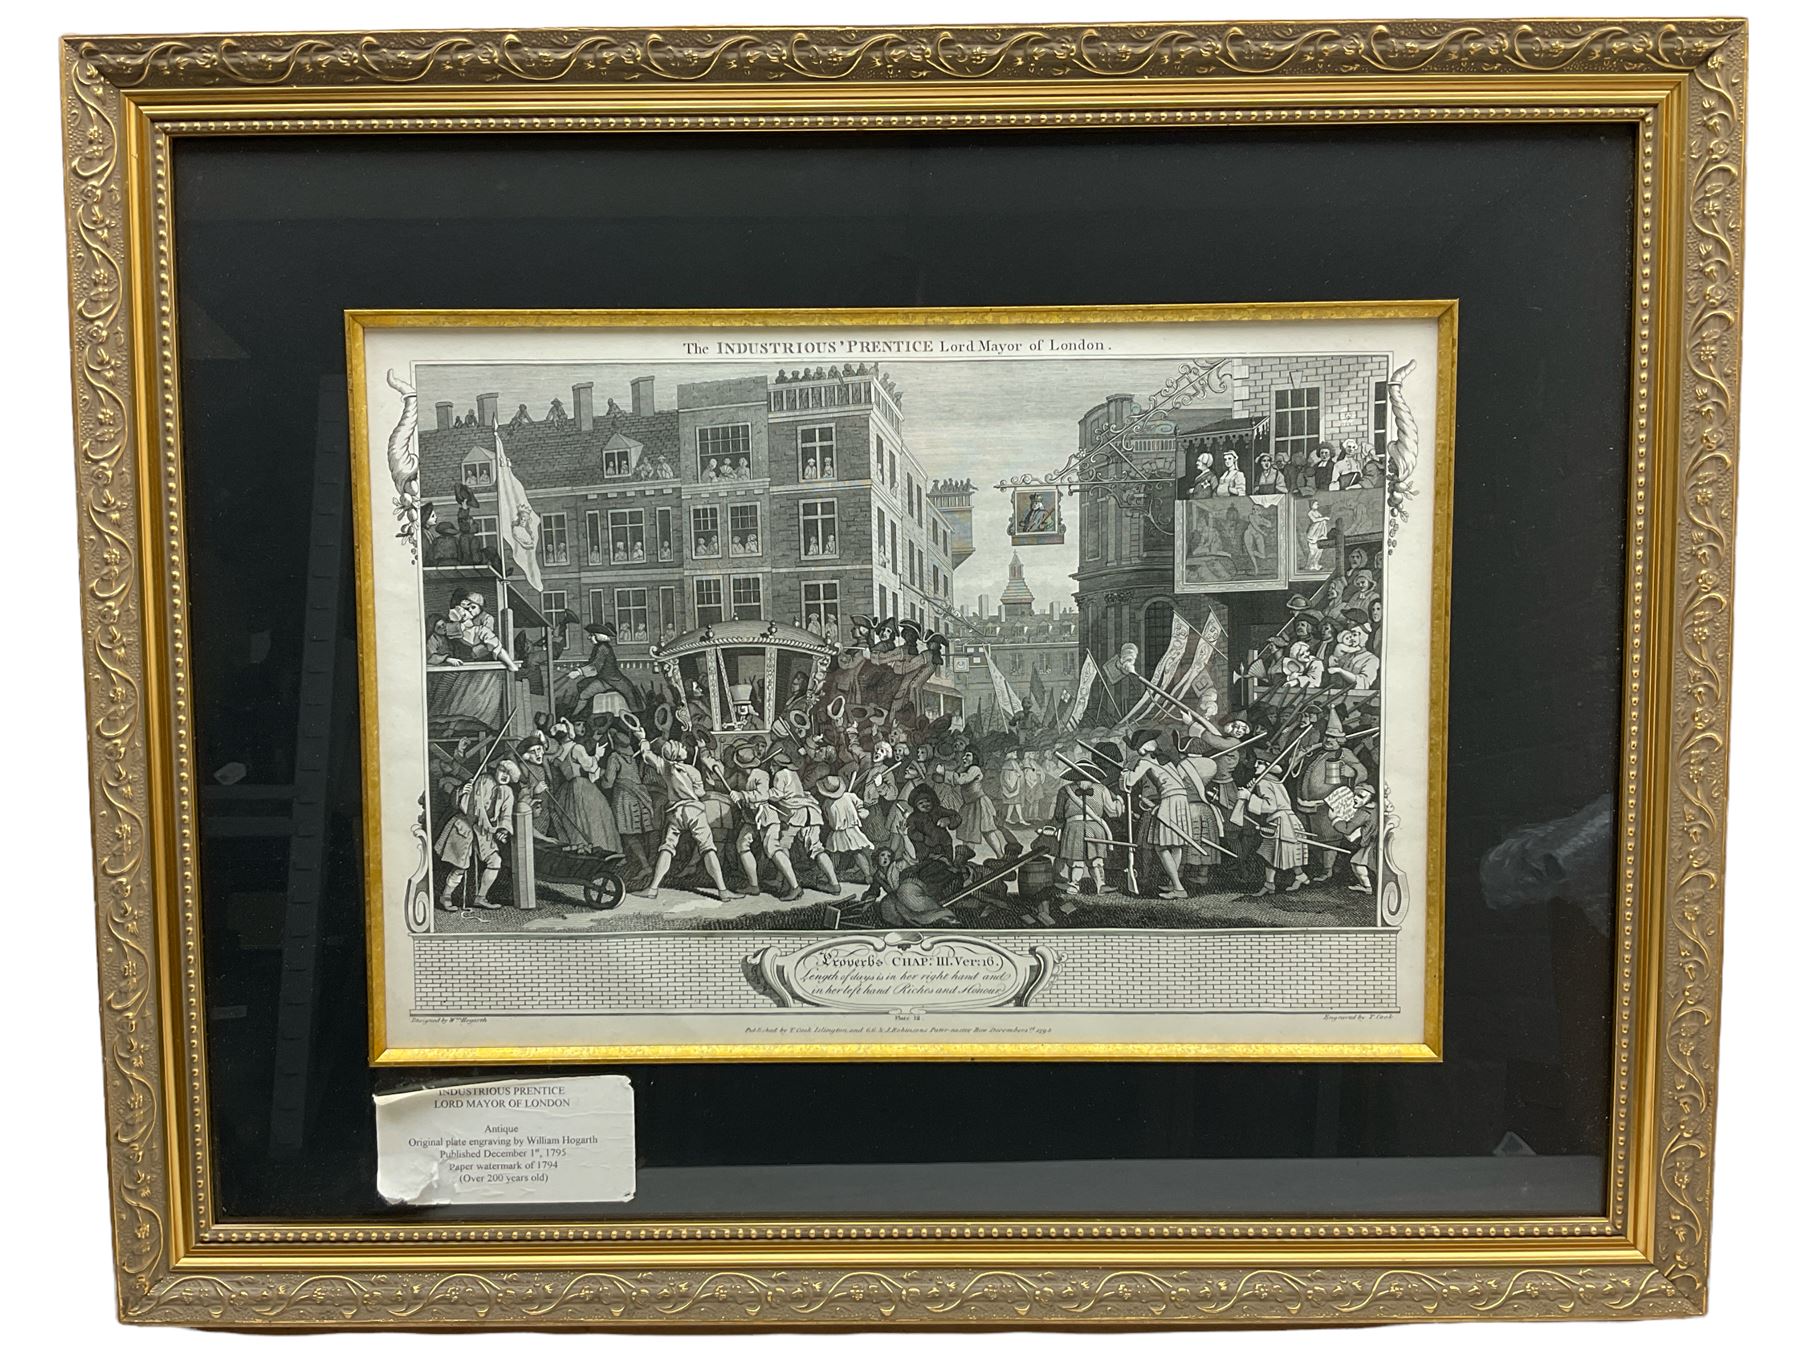 William Hogarth (British 1697-1764): 'The Industrious Prentice Lord Mayor of London' Plate 12 from t - Image 2 of 2